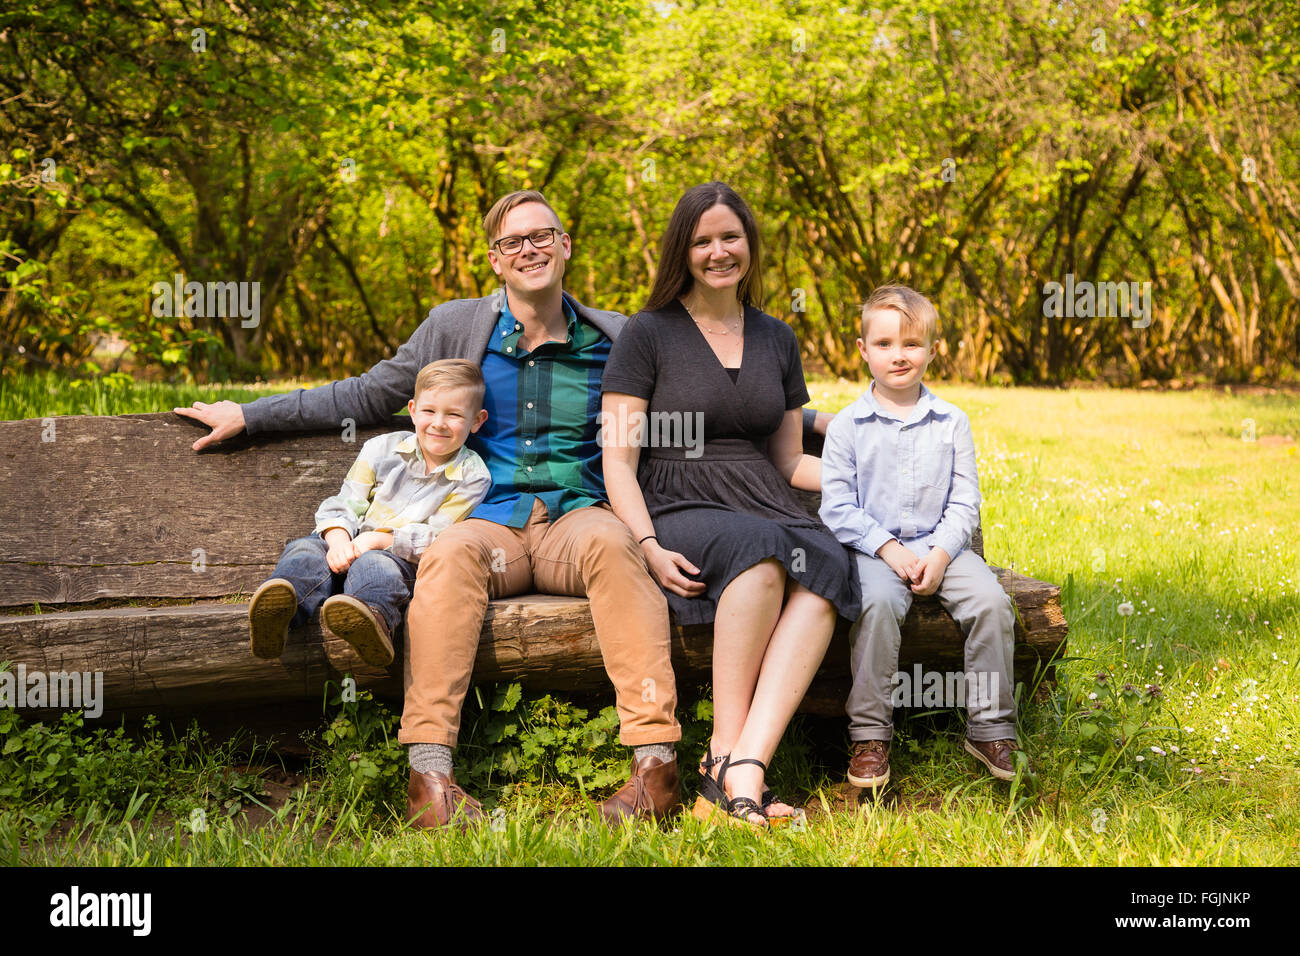 Family of four outdoors in a natural setting with nice light in a lifestyle portrait. Stock Photo